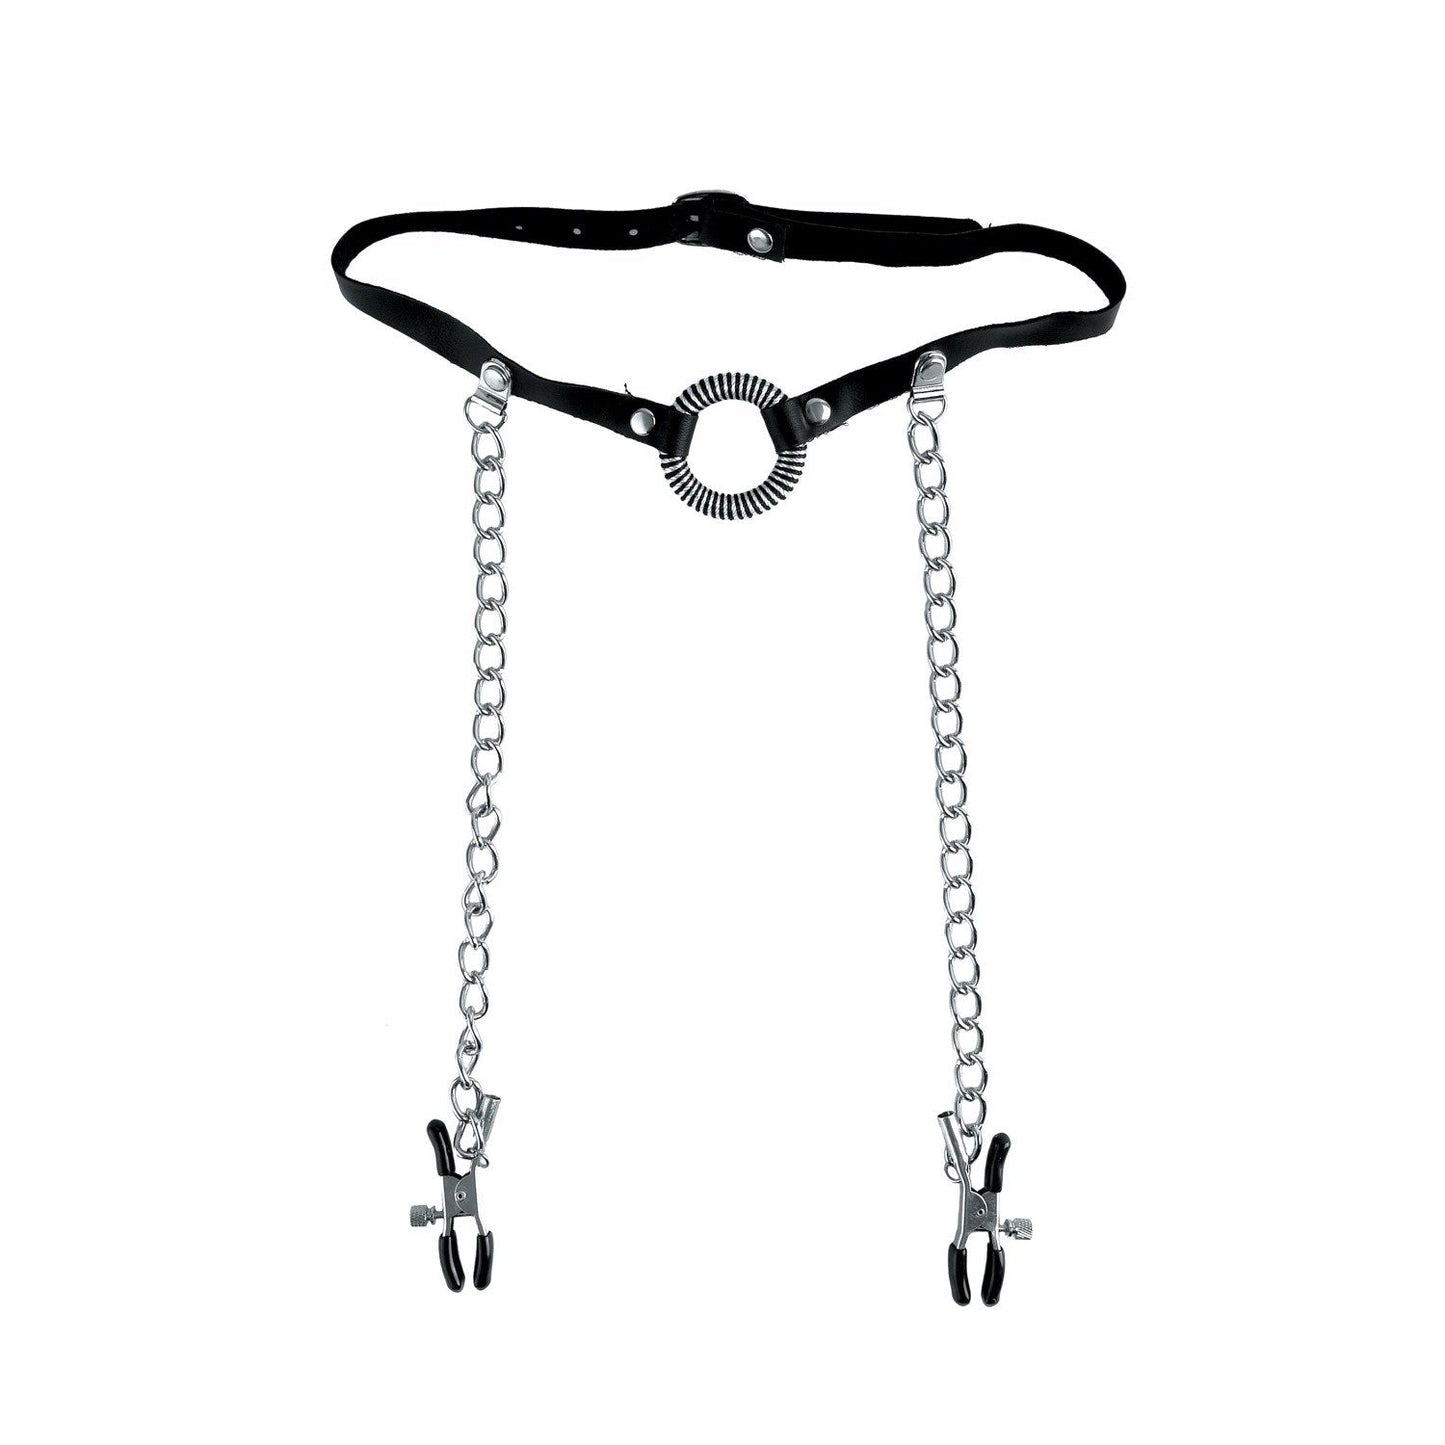 Limited Edition O-ring Gag & Nipple Clamps - Mouth and Nipple Restraints